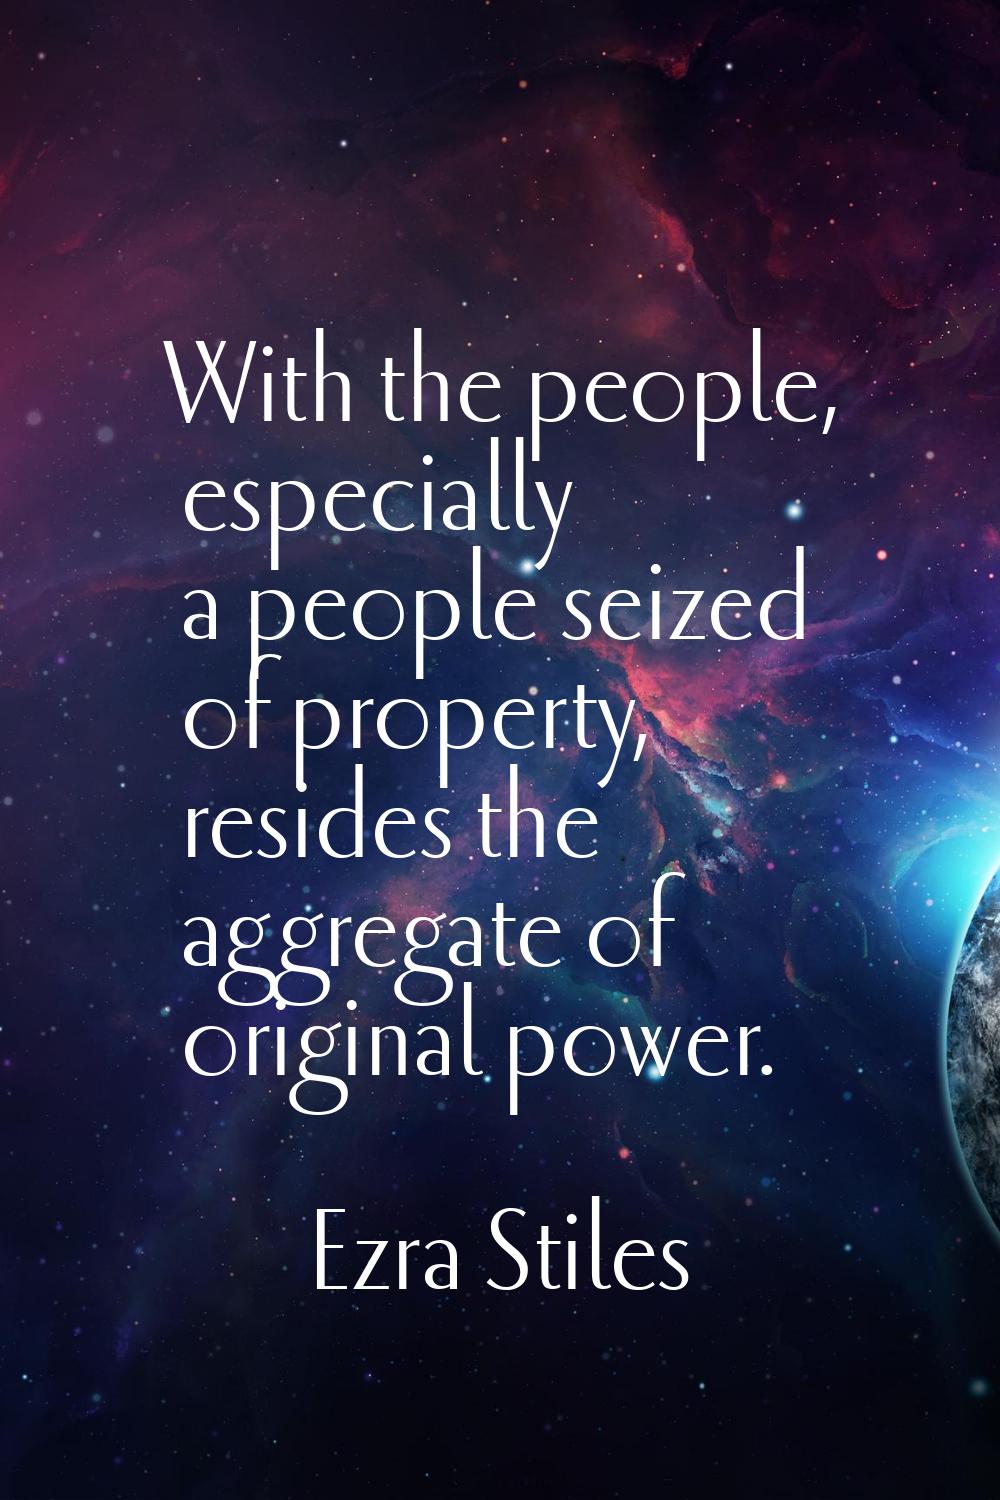 With the people, especially a people seized of property, resides the aggregate of original power.